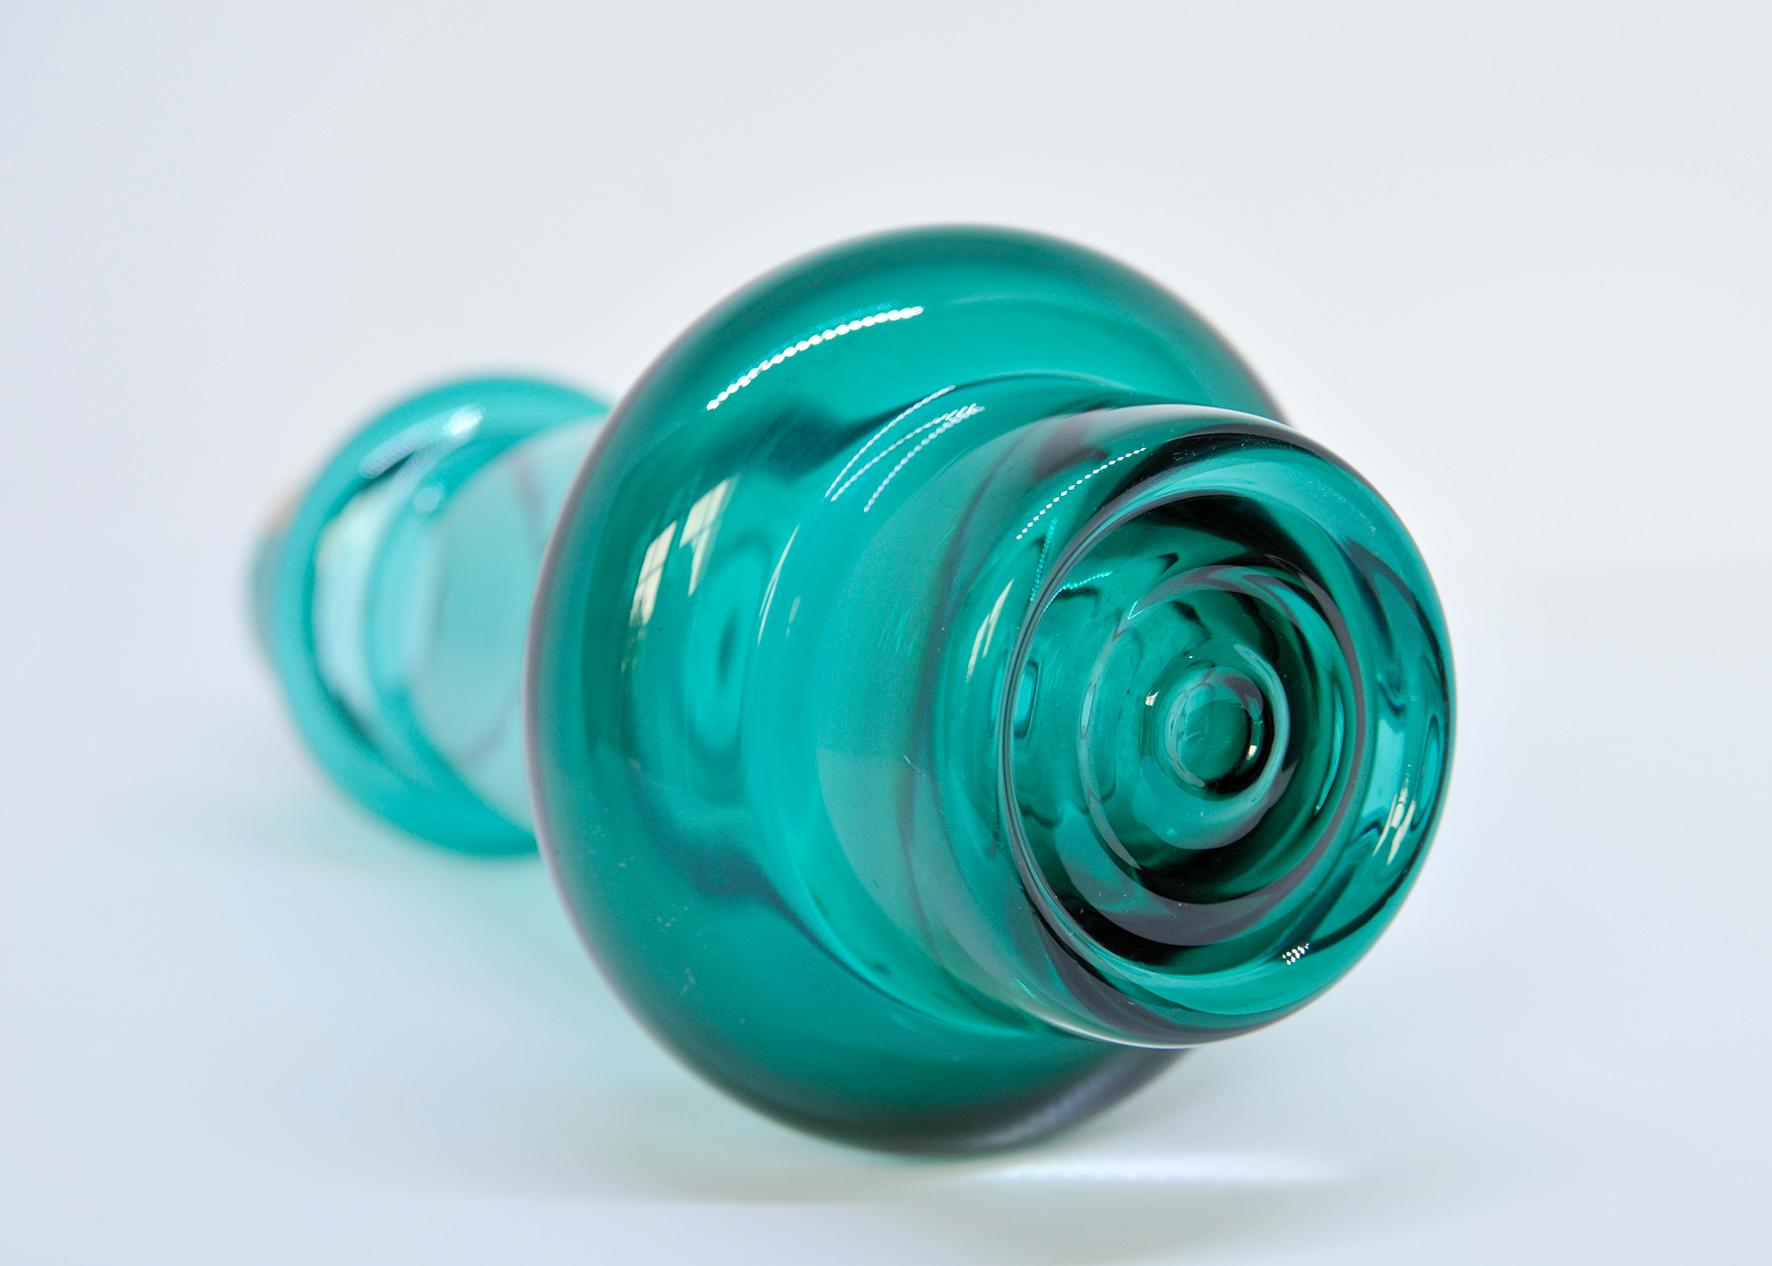 Teal vase designed by Tamara Aladin for Riihimaki, Finland. Manufactured in 1967. In excellent condition.